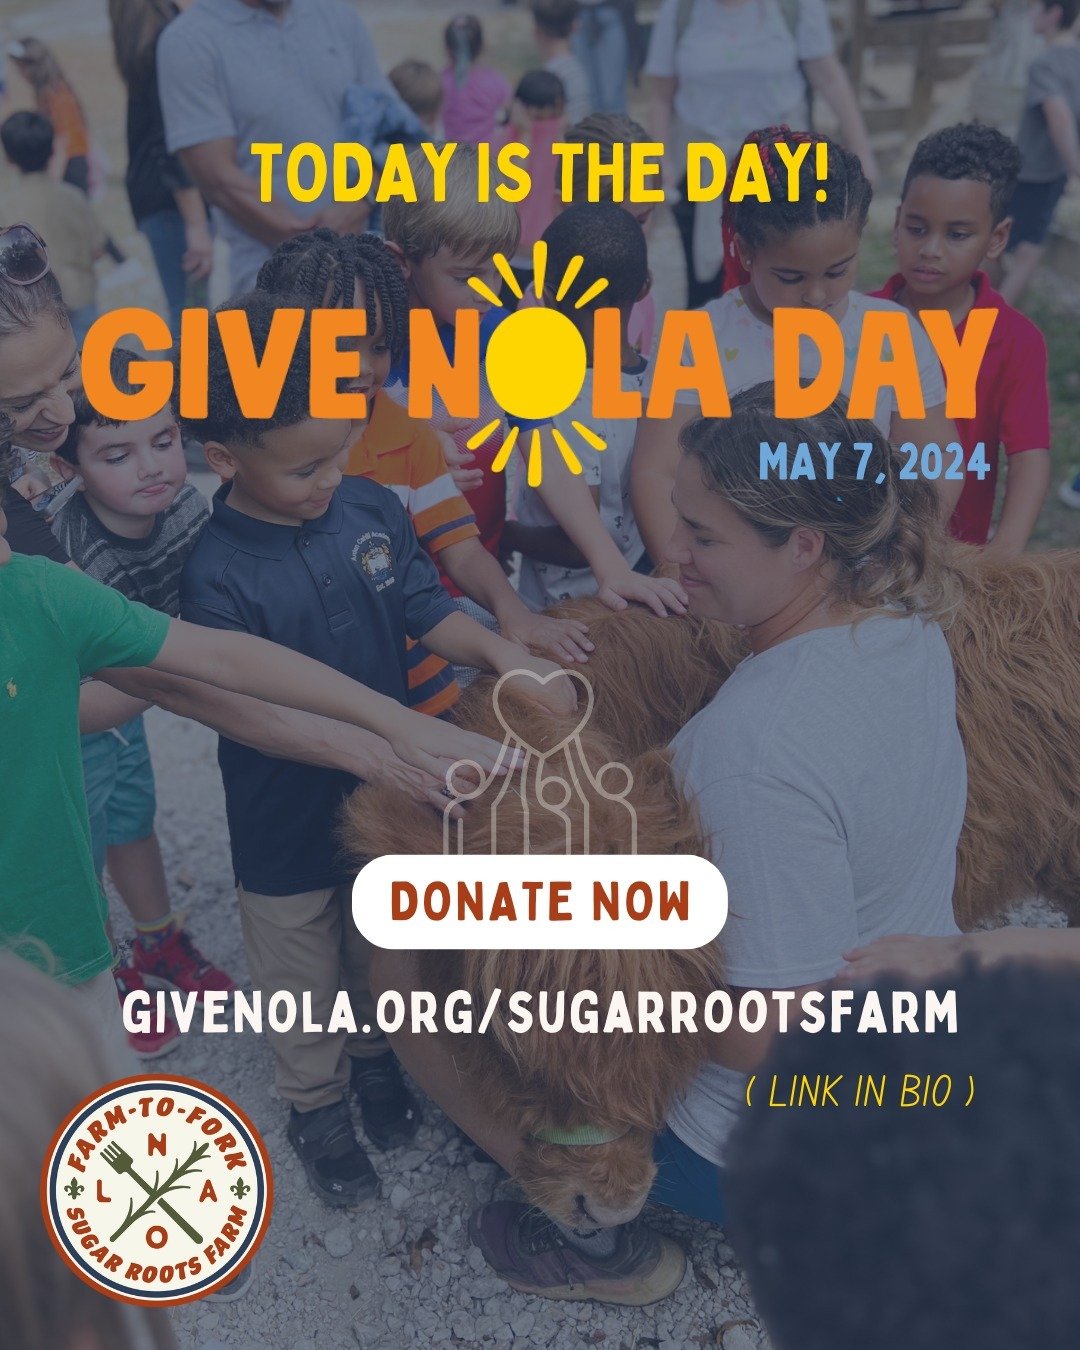 🌻Hi, Friends of Sugar Roots Farm!🌻
GiveNOLA Day is TODAY! Please visit the LINK IN BIO to donate and help keep your friendly neighborhood farm and all that we stand for going strong!

WHAT WE DO
Our mission is to cultivate a community where all can